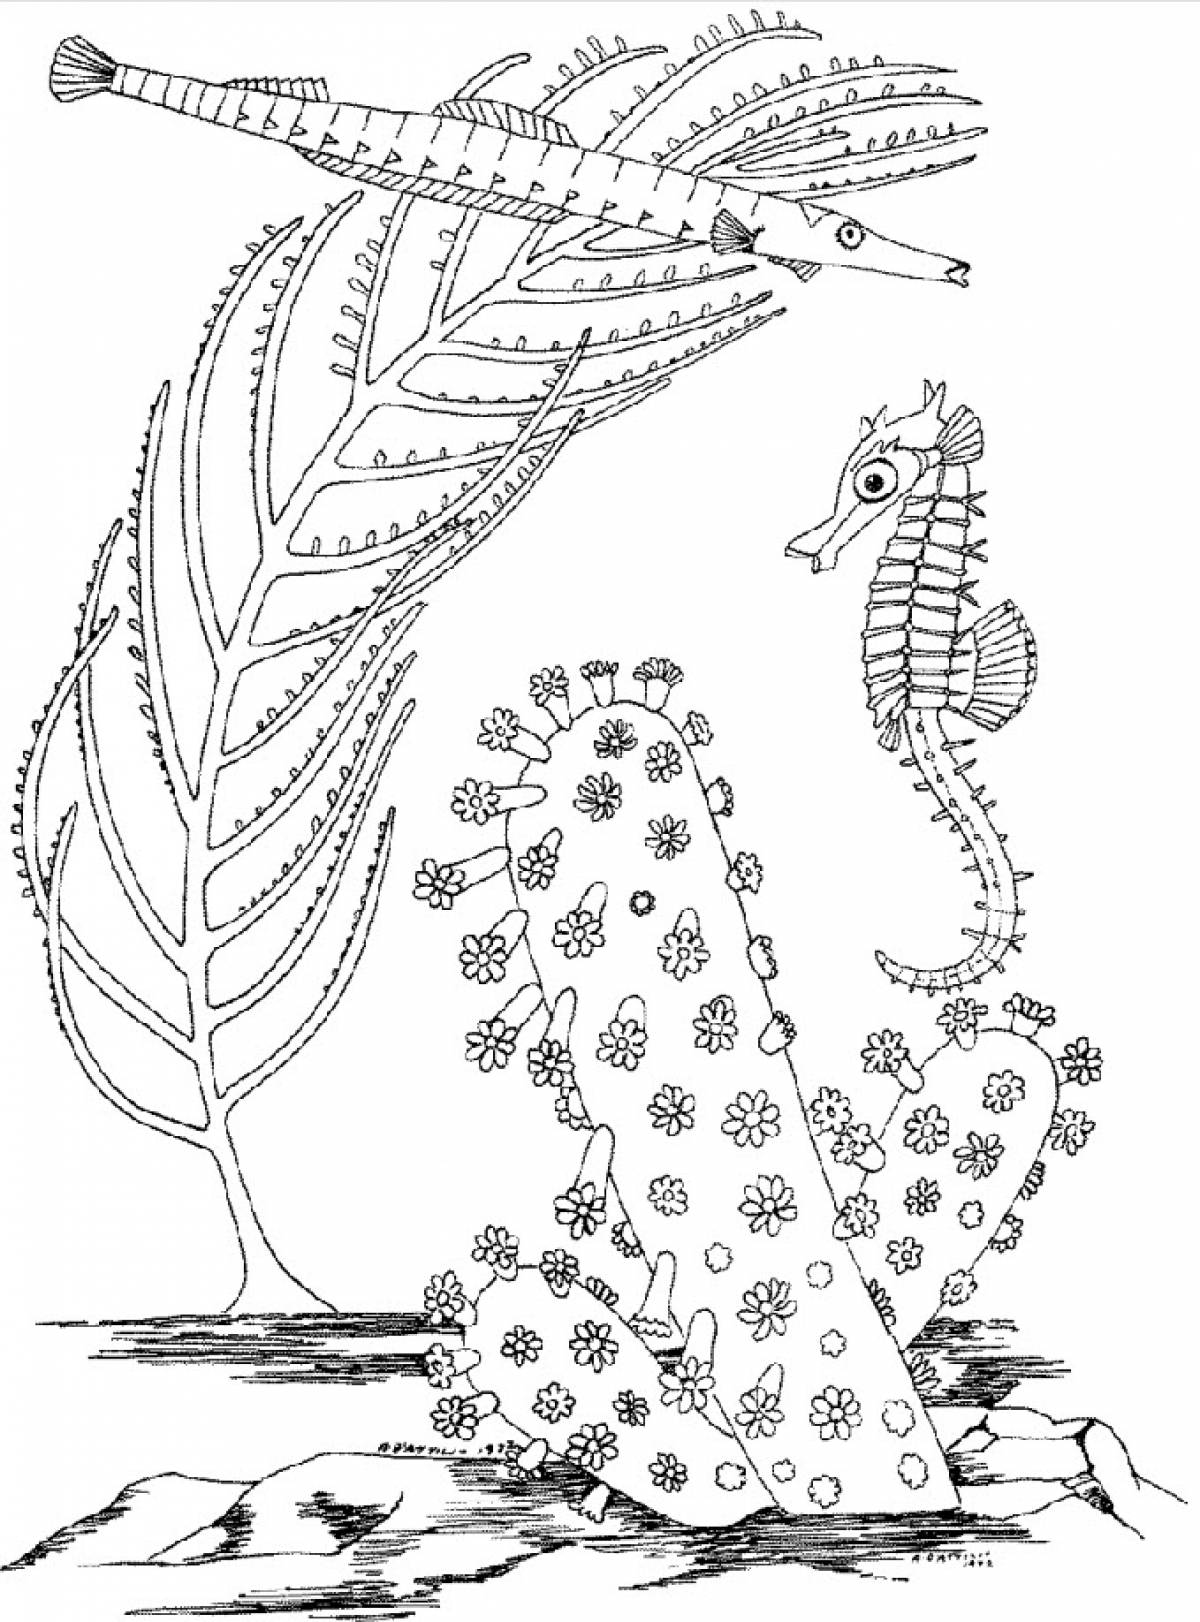 Needle fish and seahorse